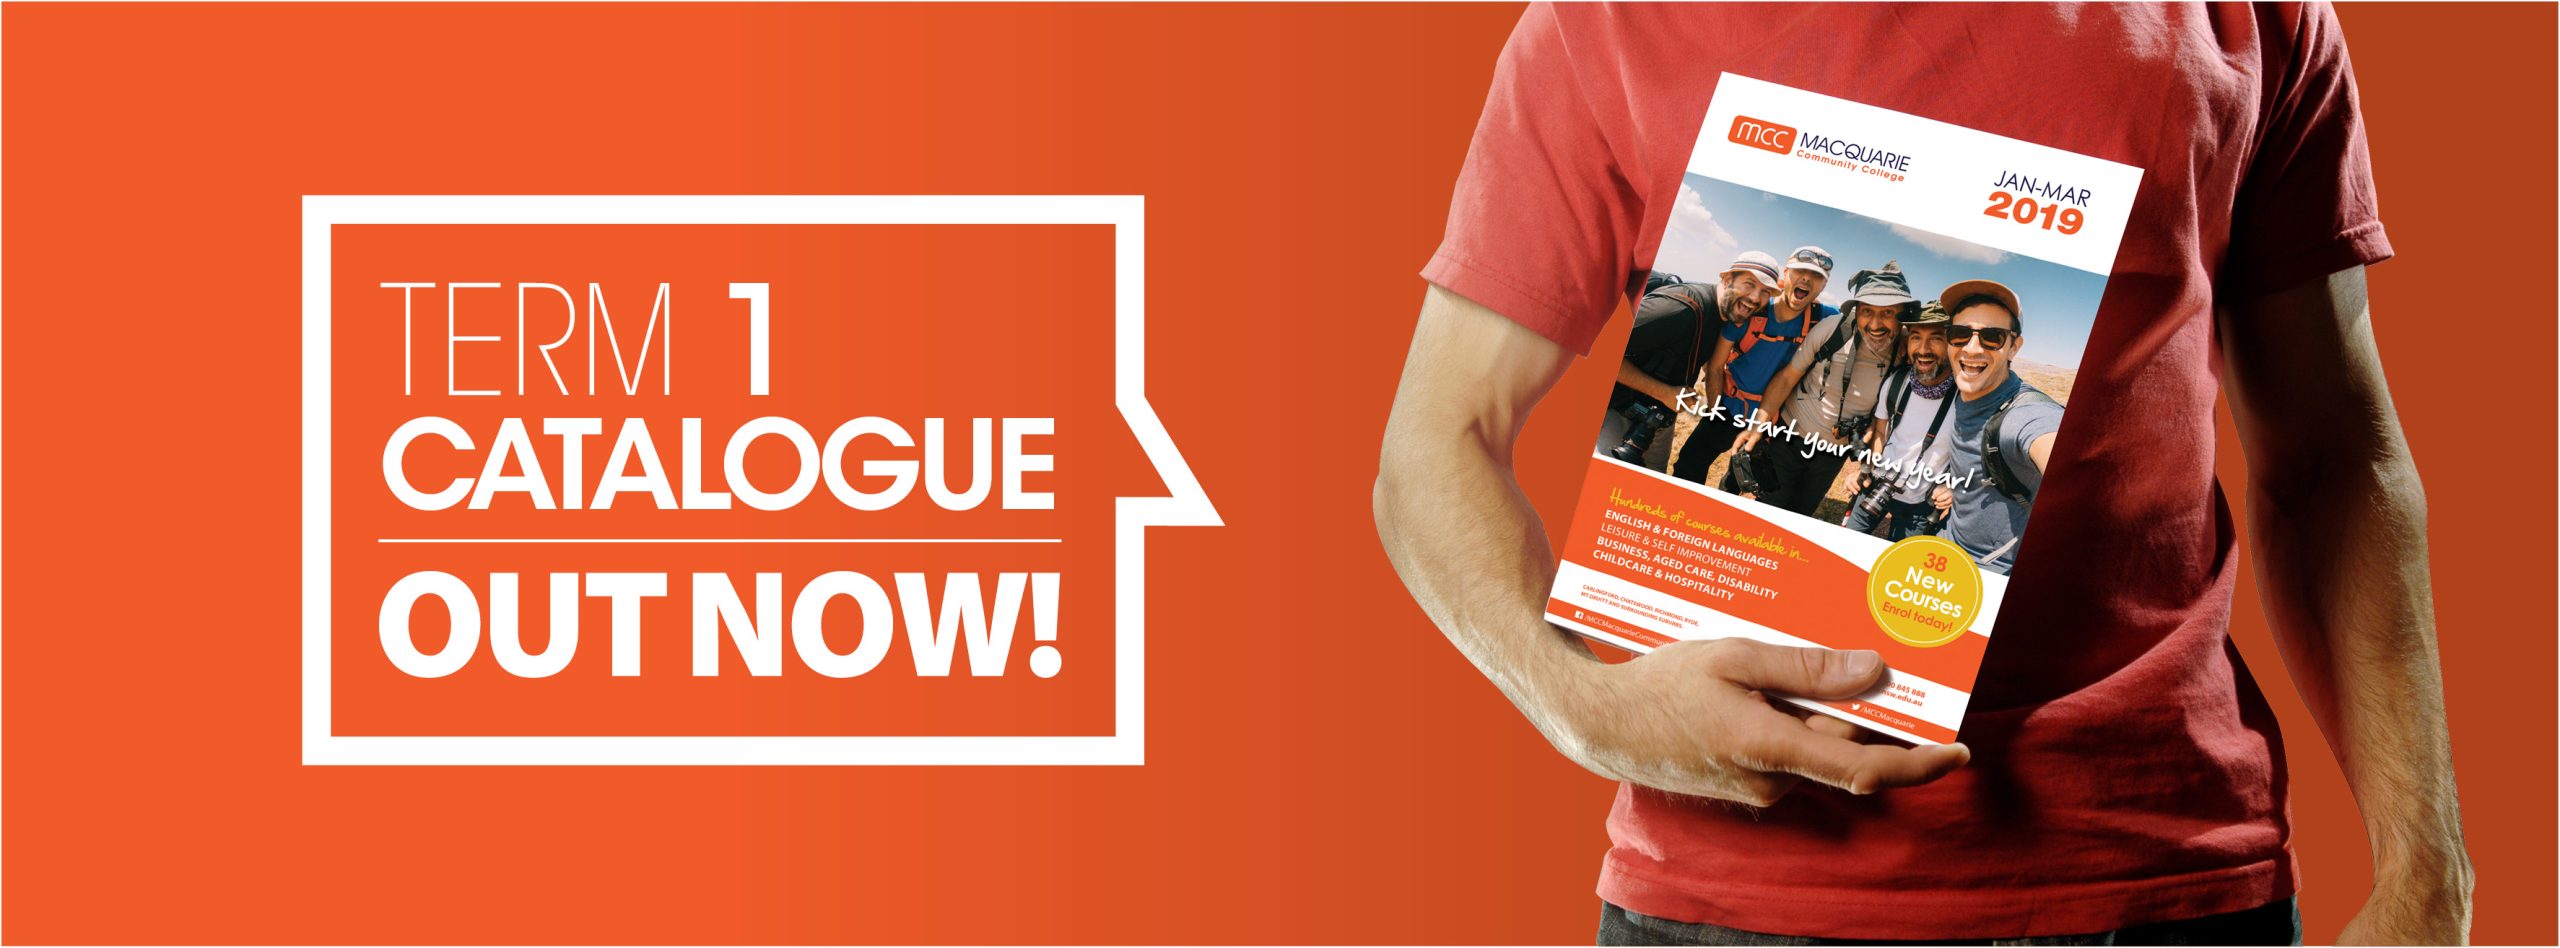 Term 1, 2019 Catalogue Out Now - 38 New Courses to Try!